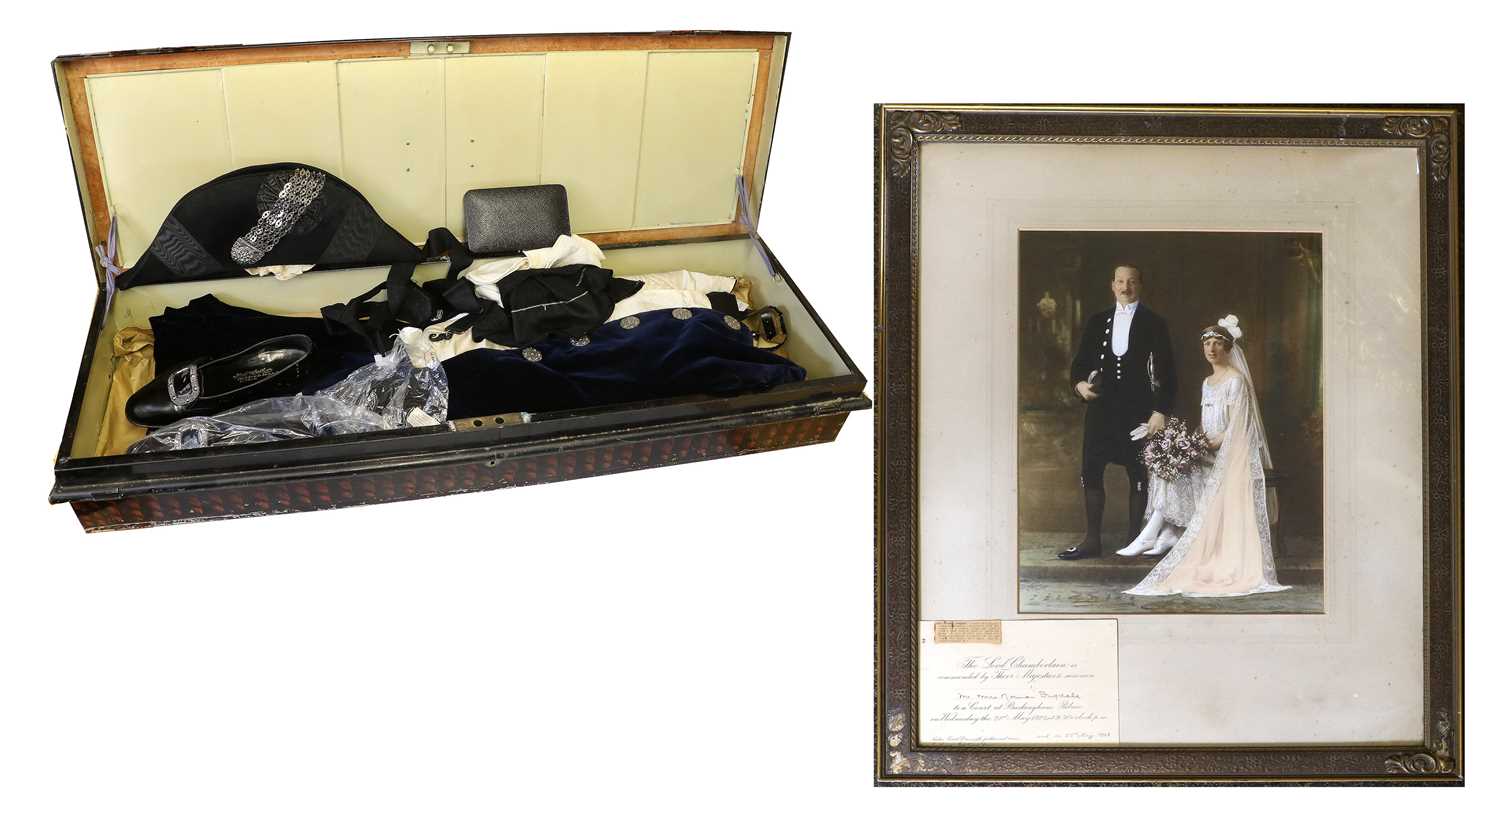 Early 20th Century Court Uniform Belonging to Mr Norman Dugdale comprising a midnight blue velvet